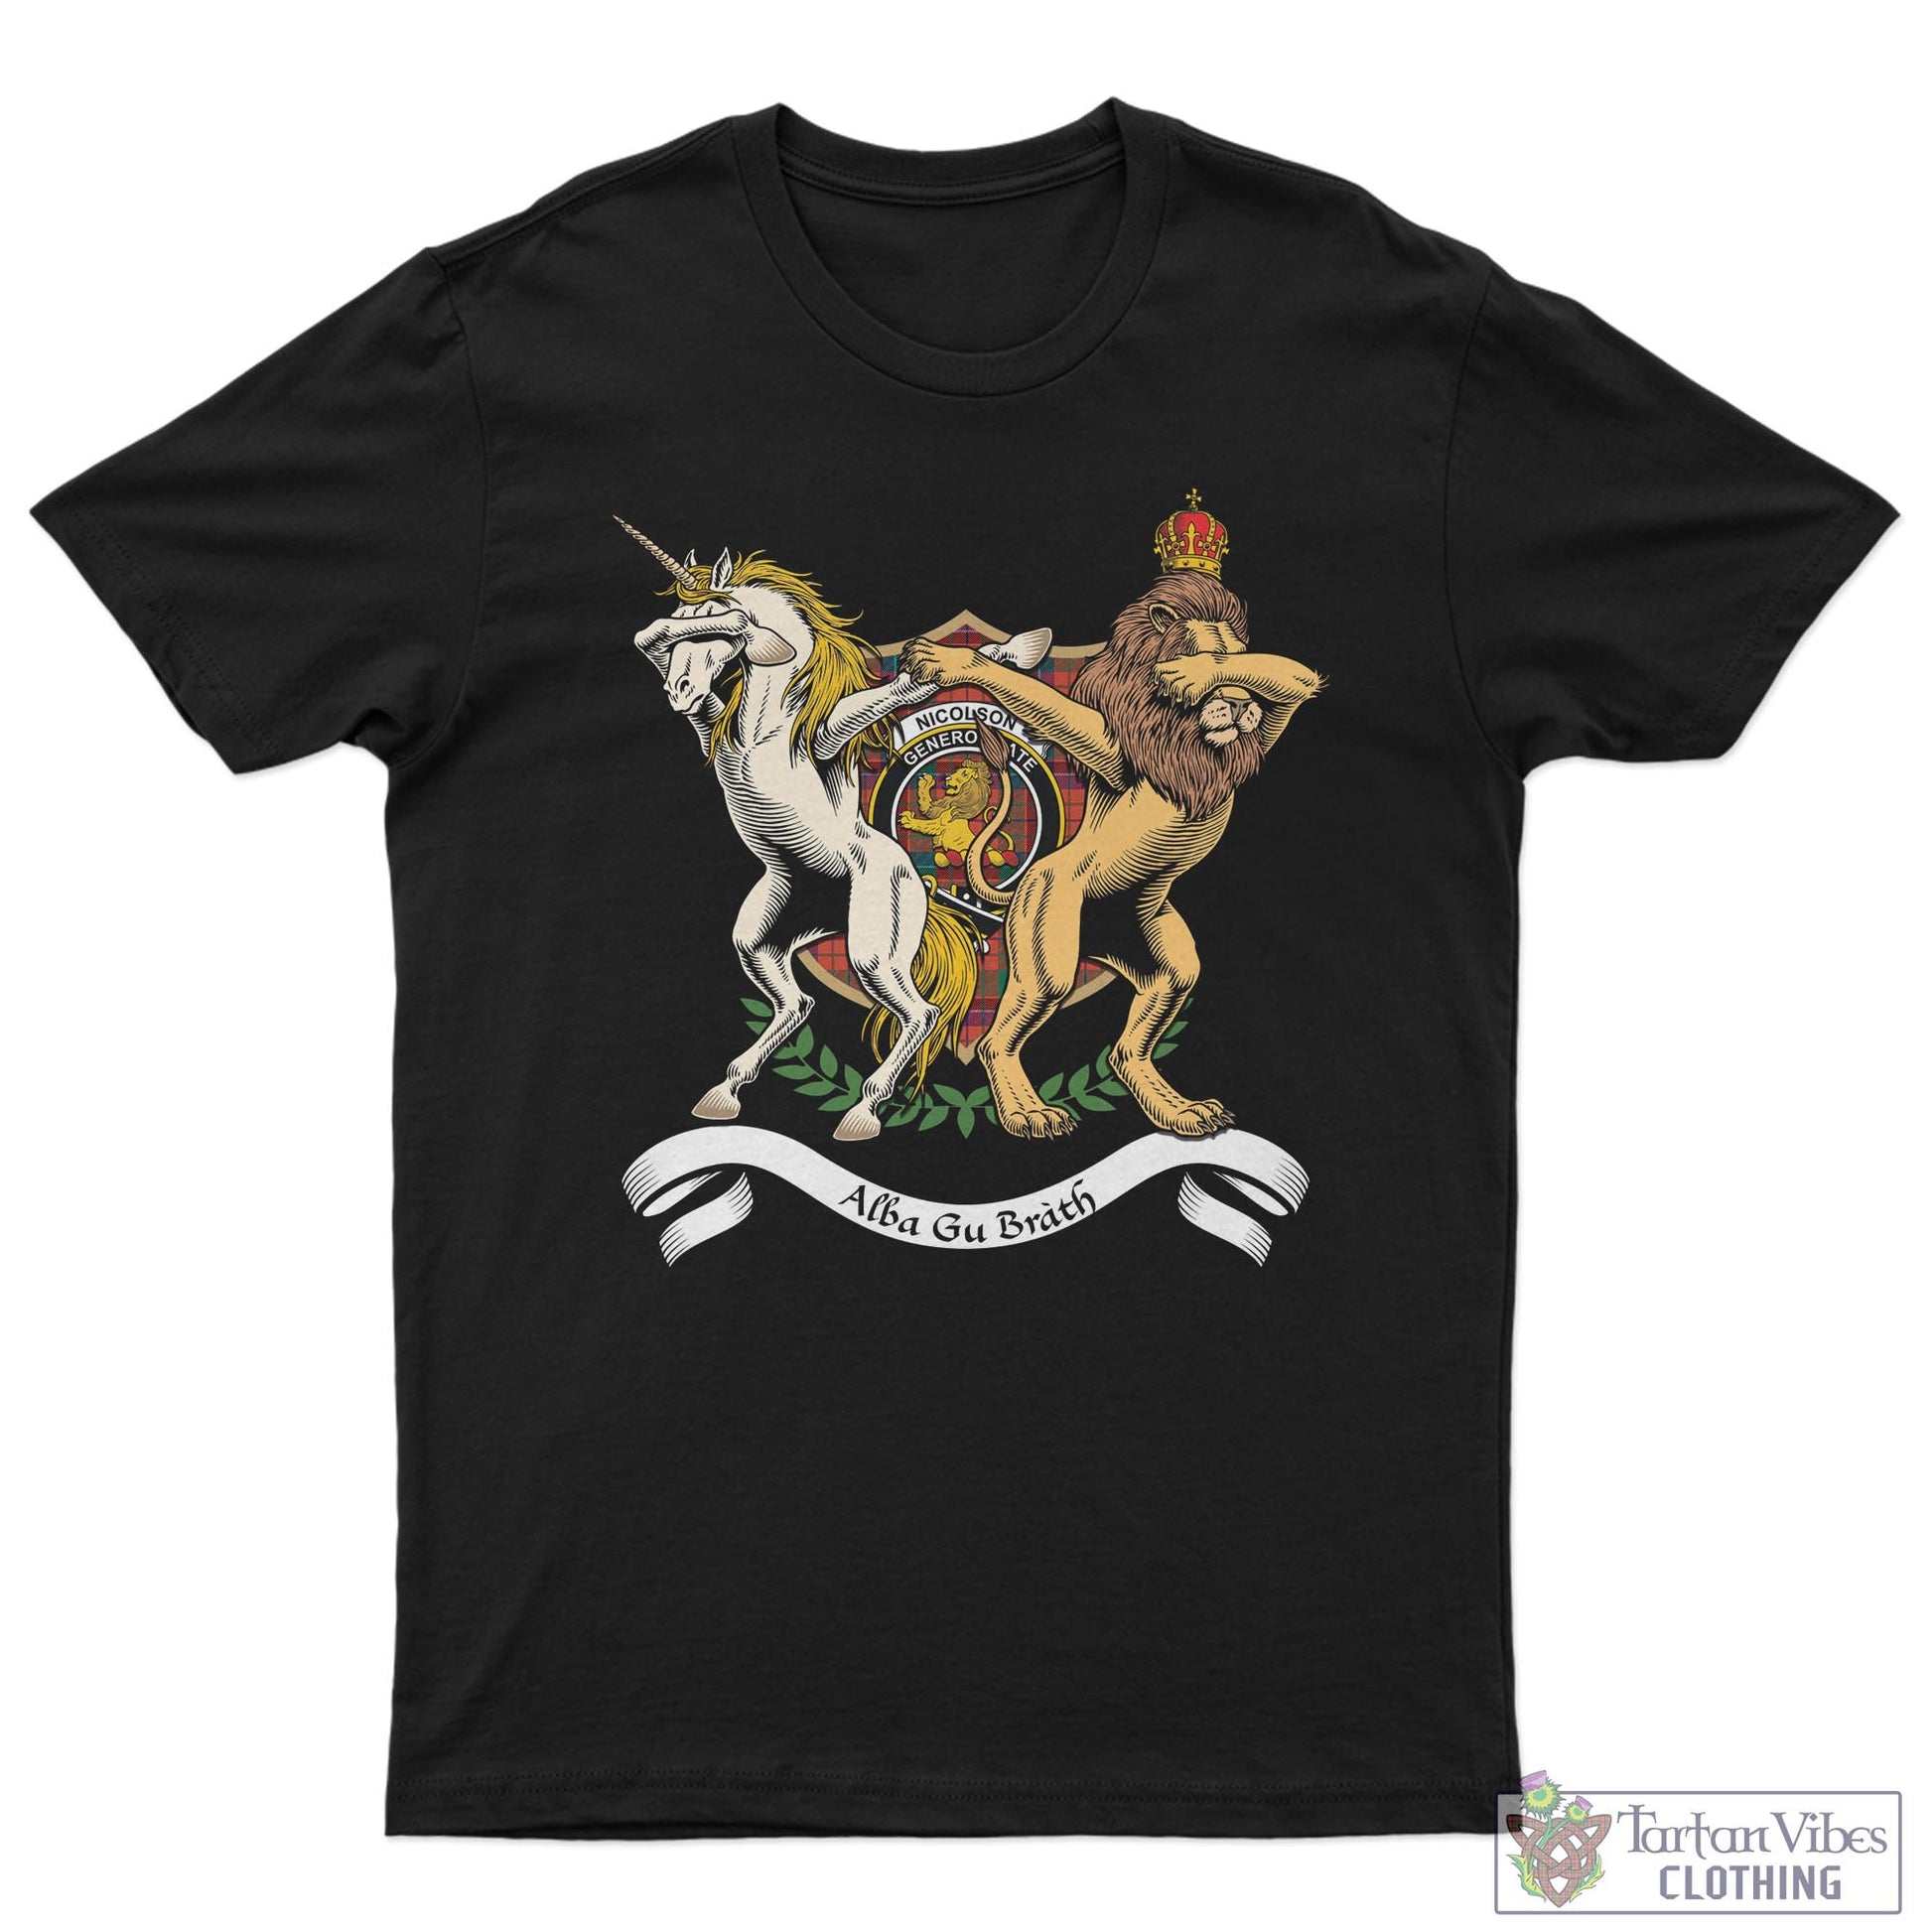 Tartan Vibes Clothing Nicolson Ancient Family Crest Cotton Men's T-Shirt with Scotland Royal Coat Of Arm Funny Style